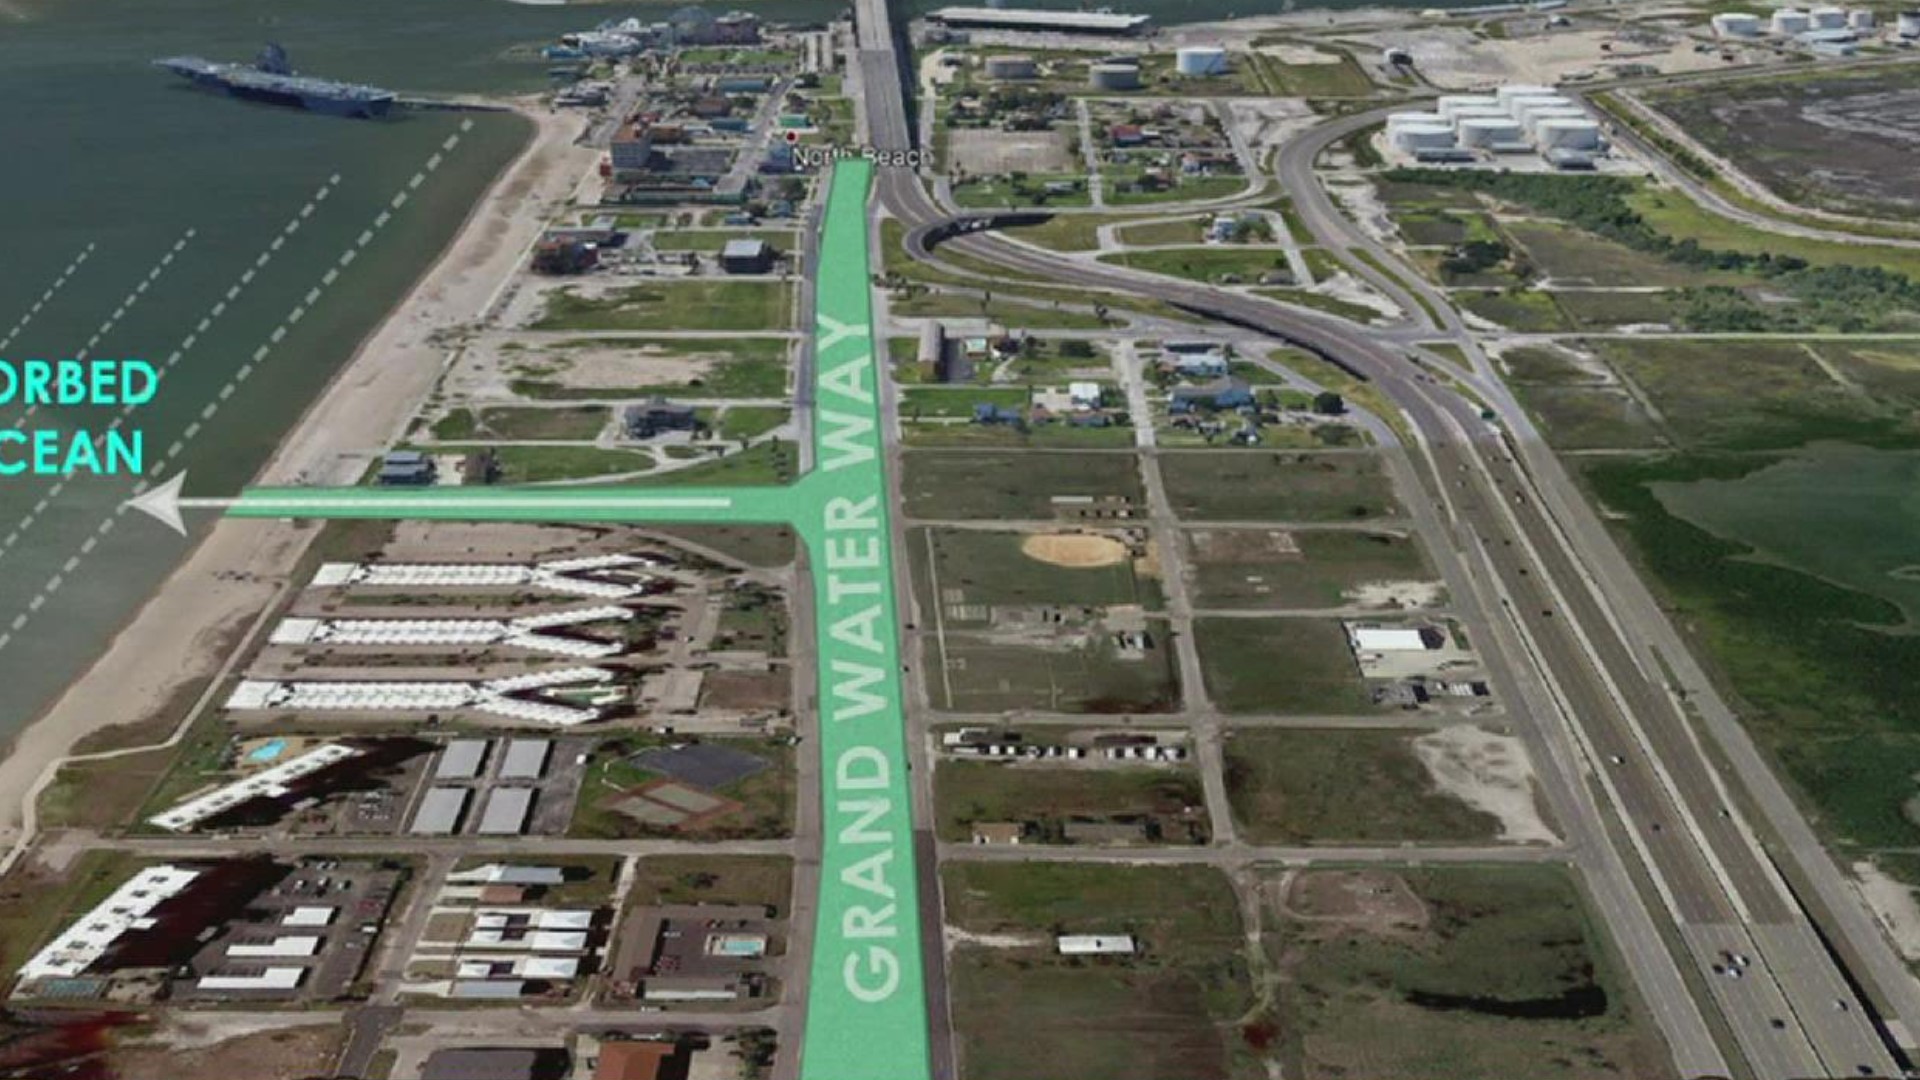 The City of Corpus Christi has entered into a low cost contract with a design firm to get guidance on picking the best plan to alleviate flooding in North Beach.